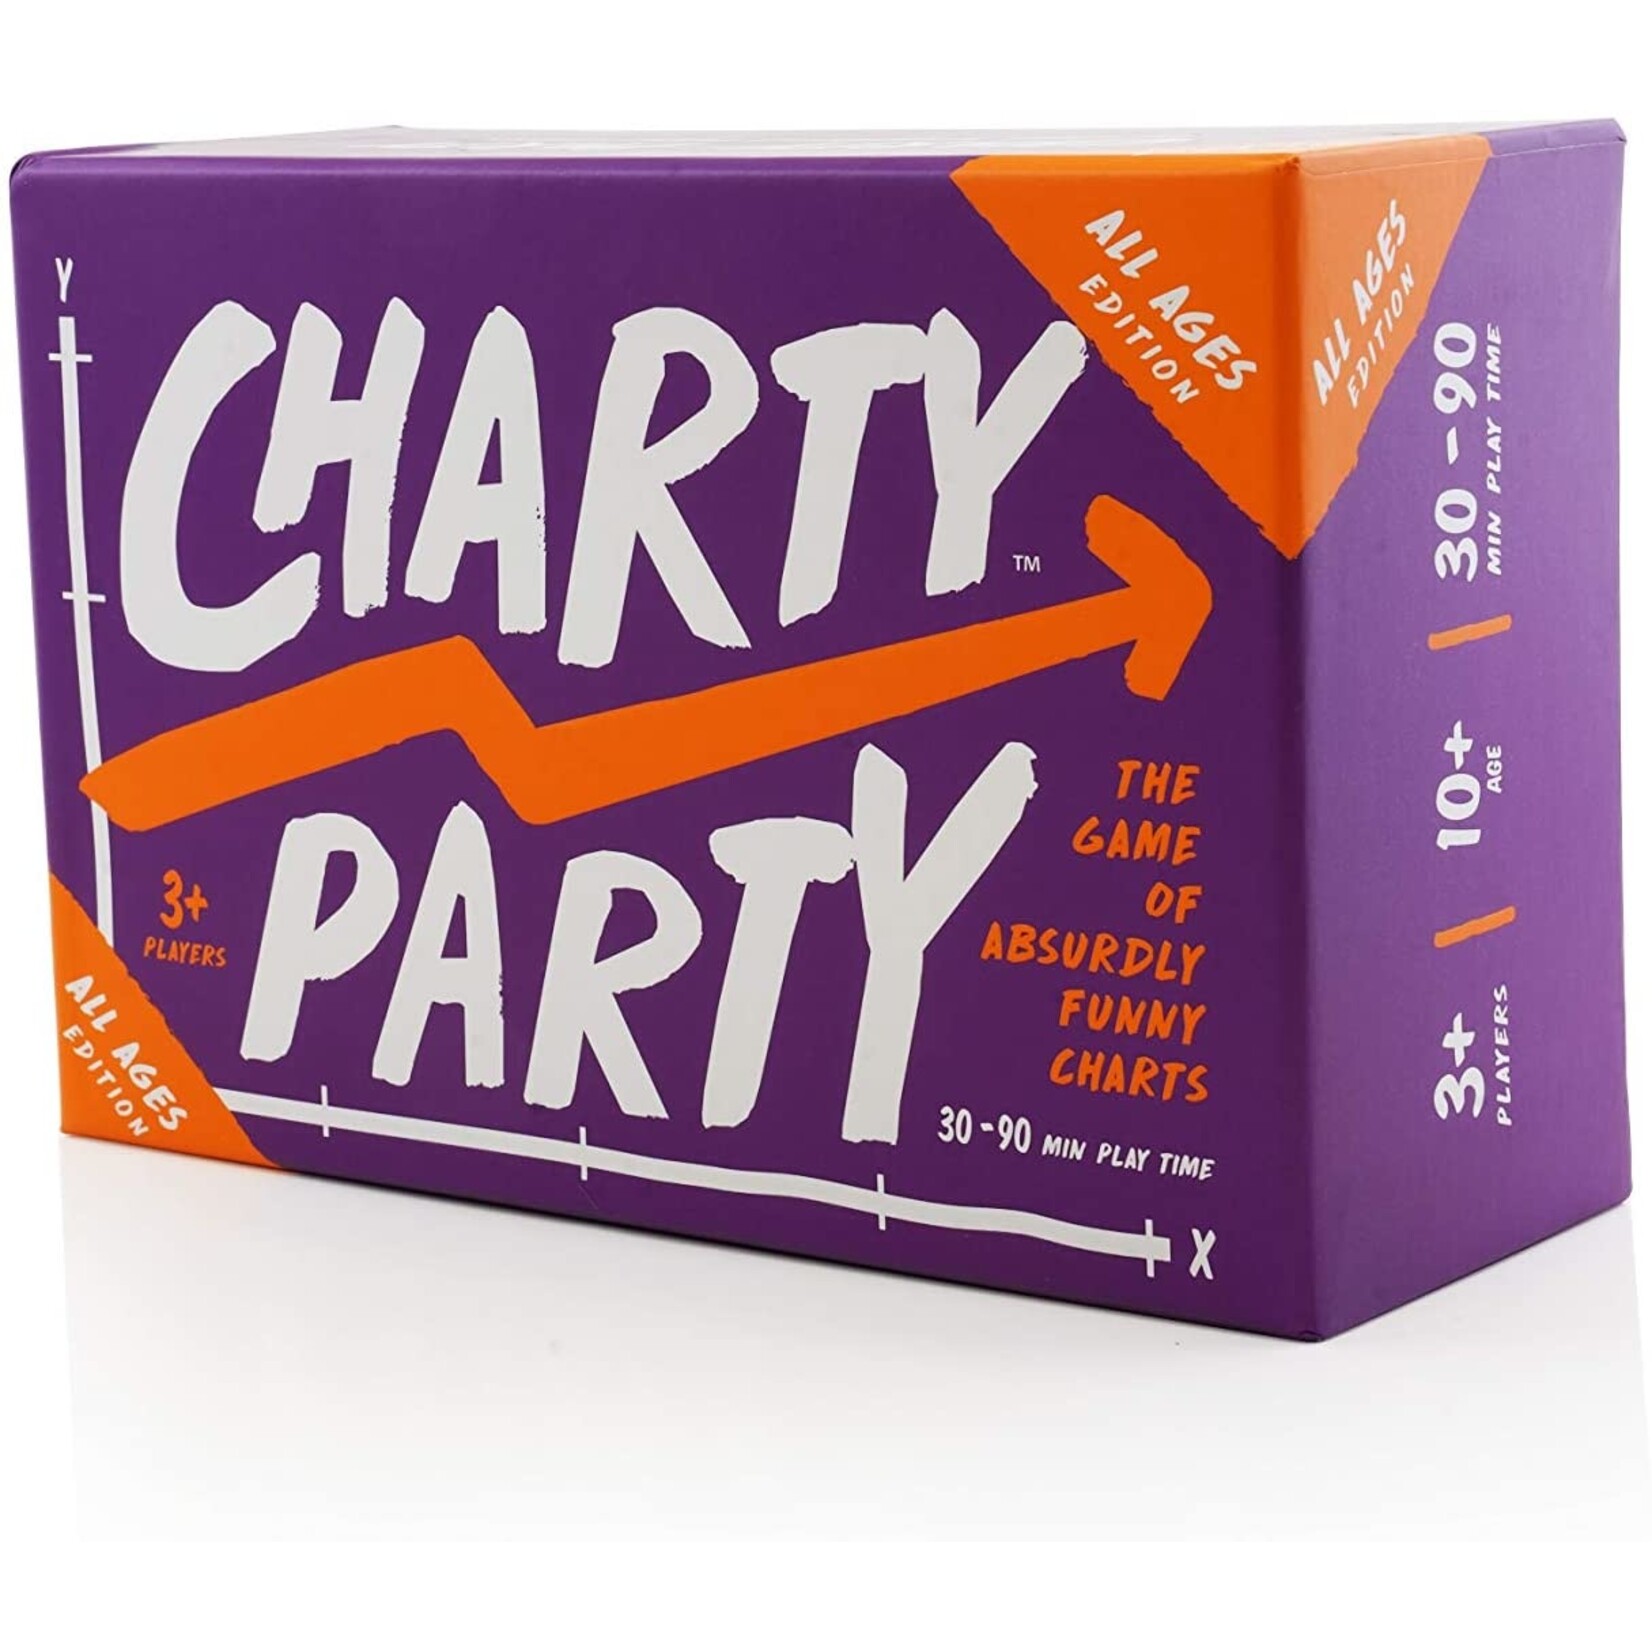 Very Special Games Charty Party: All Ages Edition